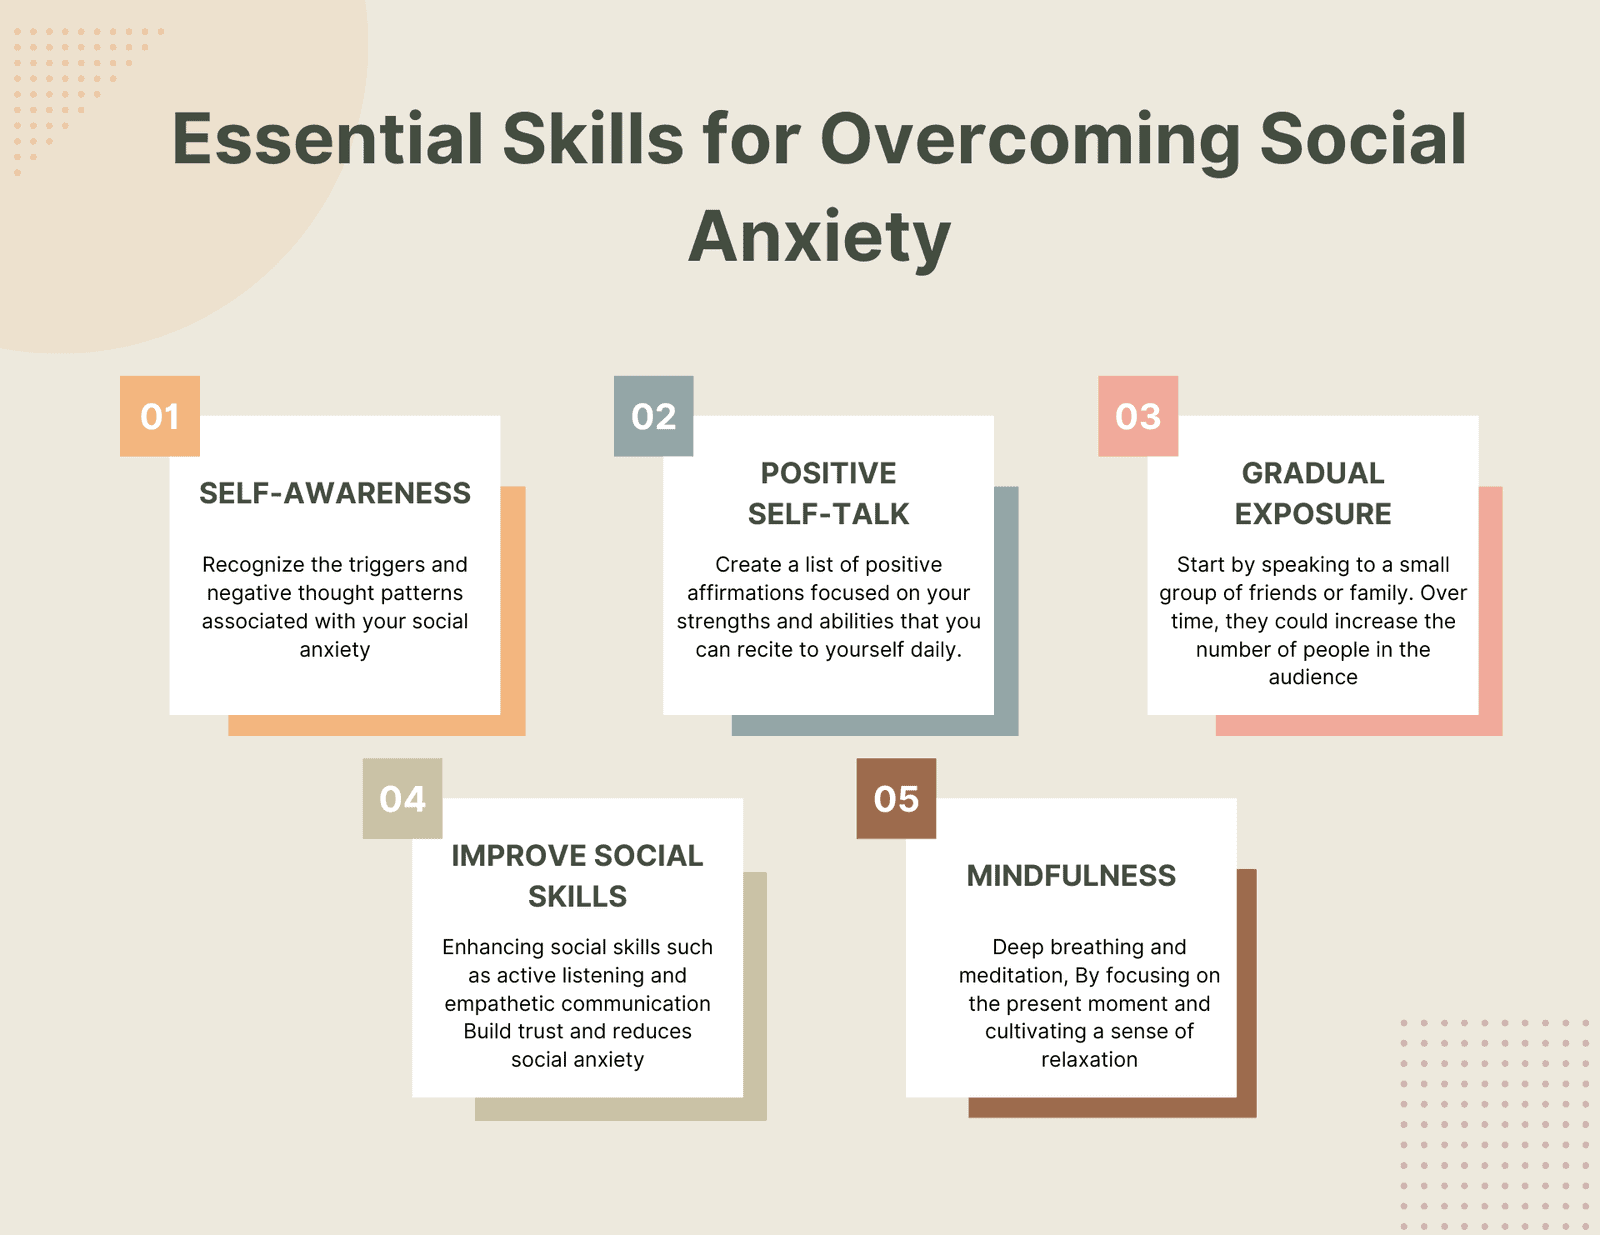 Skills to Overcome Social Anxiety